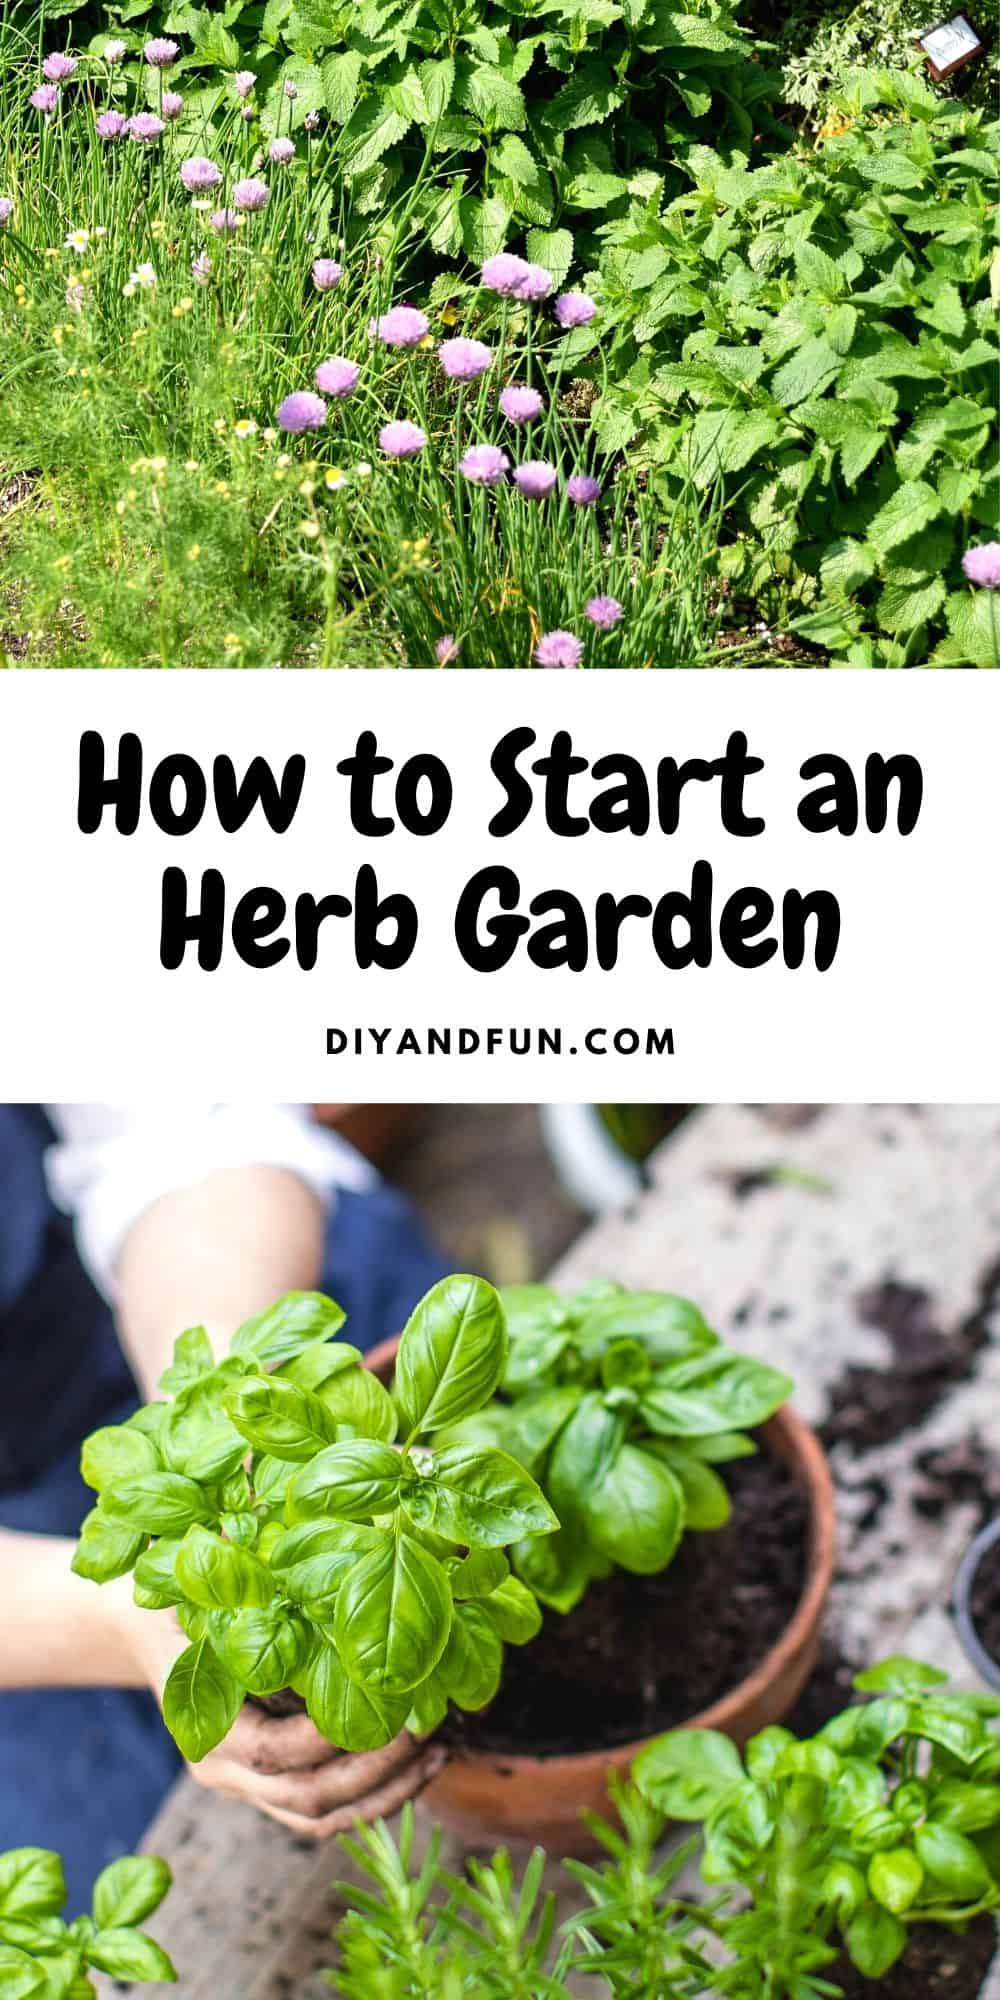 How to Start a Herb Garden, a simple guide for beginners on growing an herb garden that is easy to maintain.